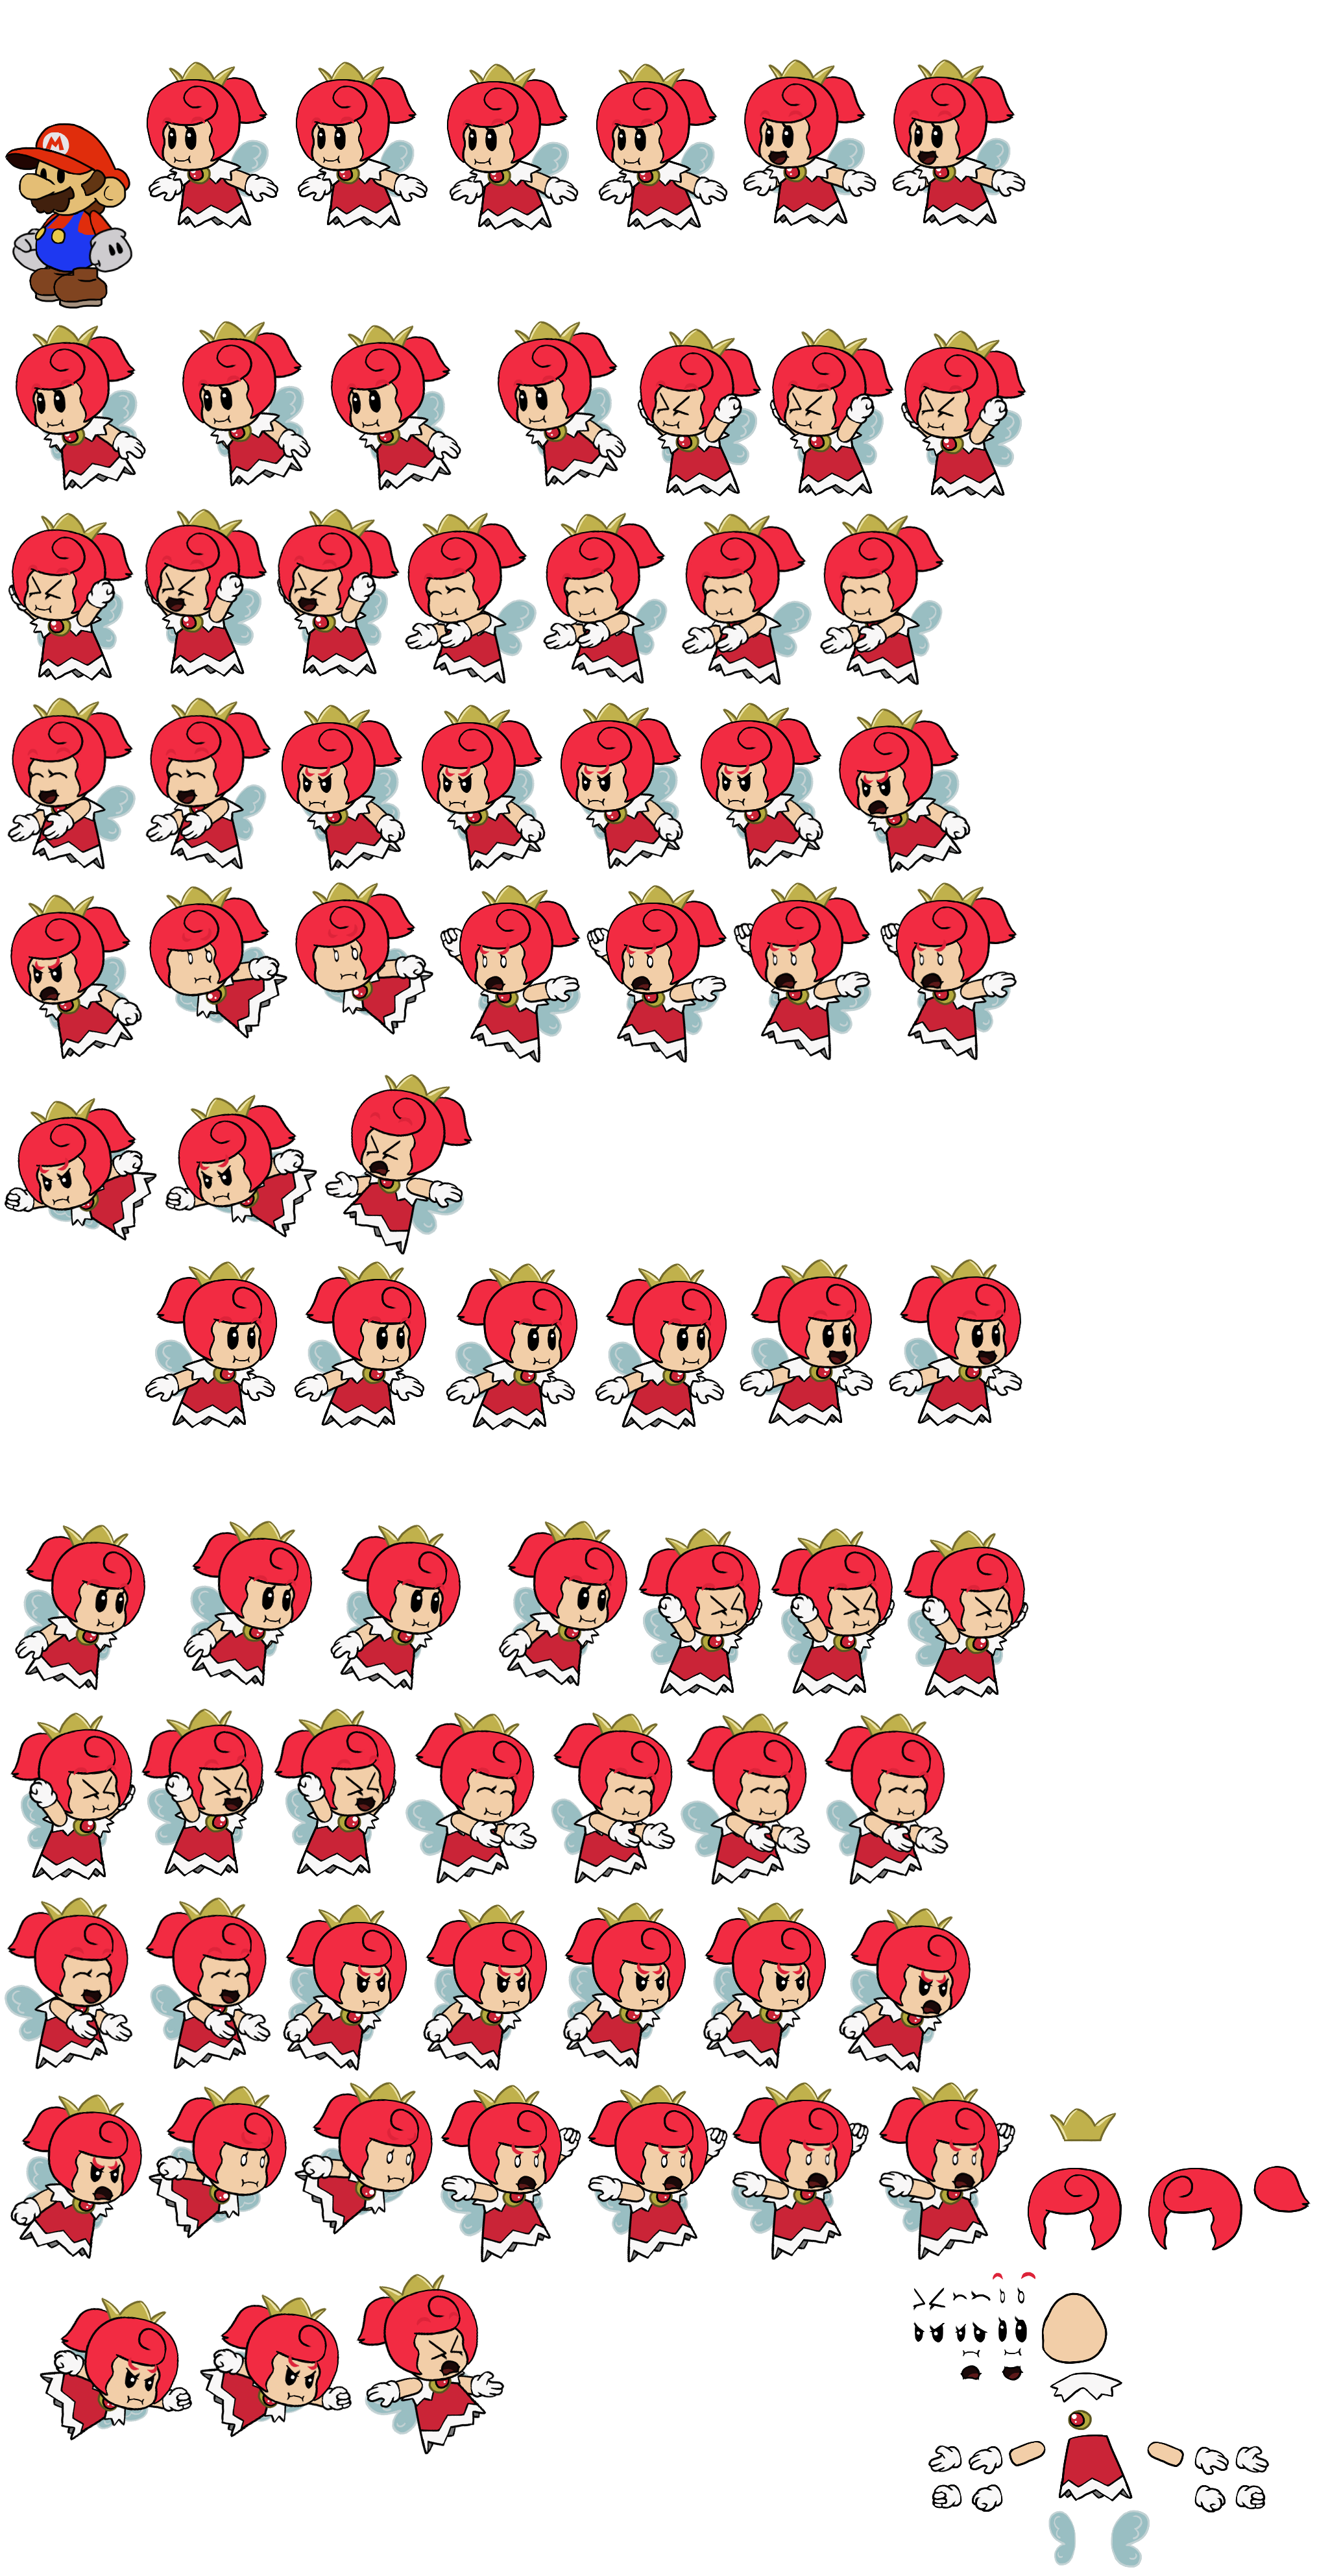 Red Sprixie Princess (Paper Mario-Style)